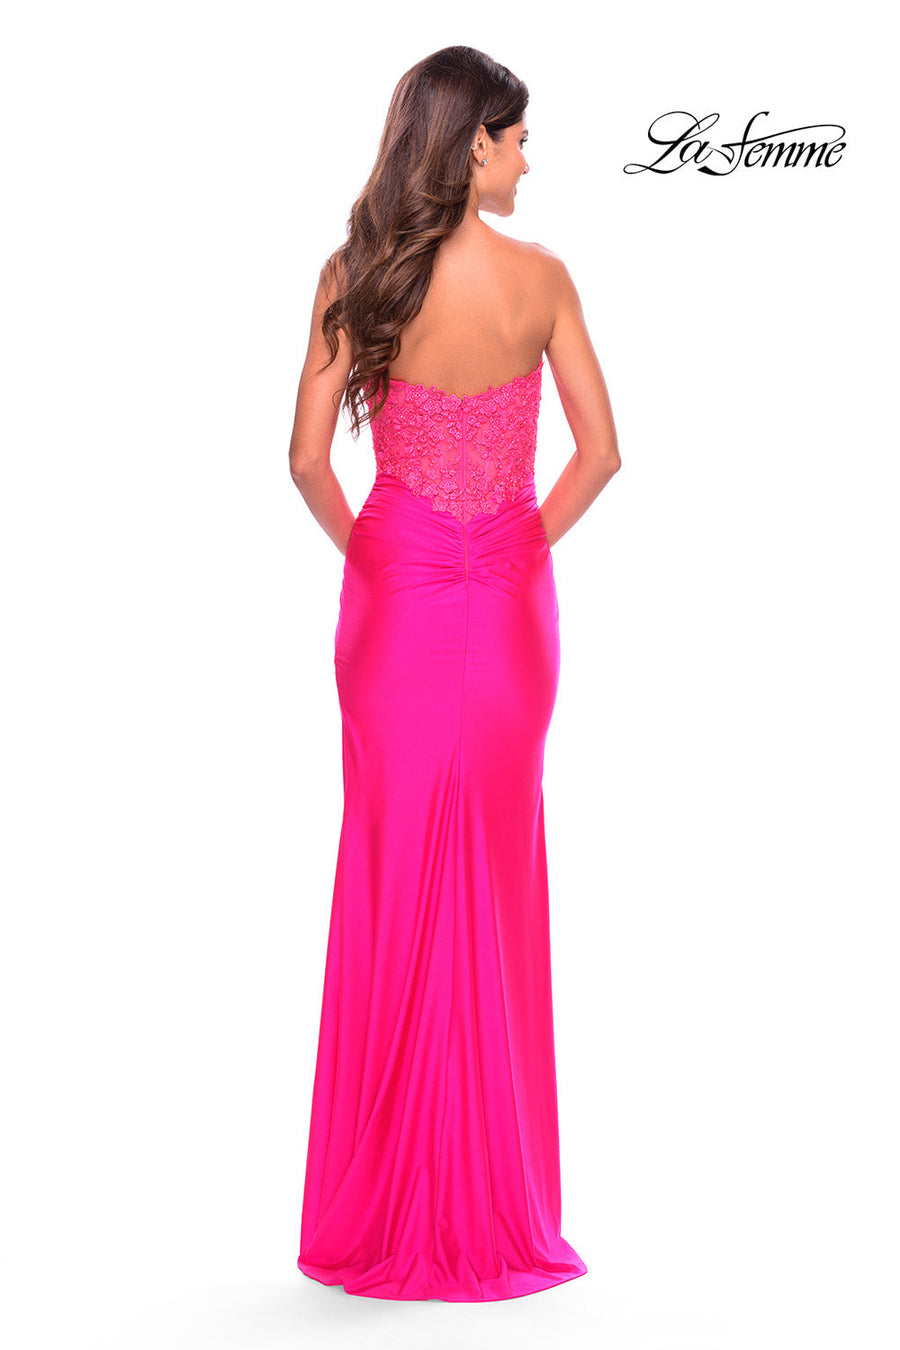 La Femme 31411 prom dress images.  La Femme 31411 is available in these colors: Light Periwinkle, Neon Coral, Neon Pink.